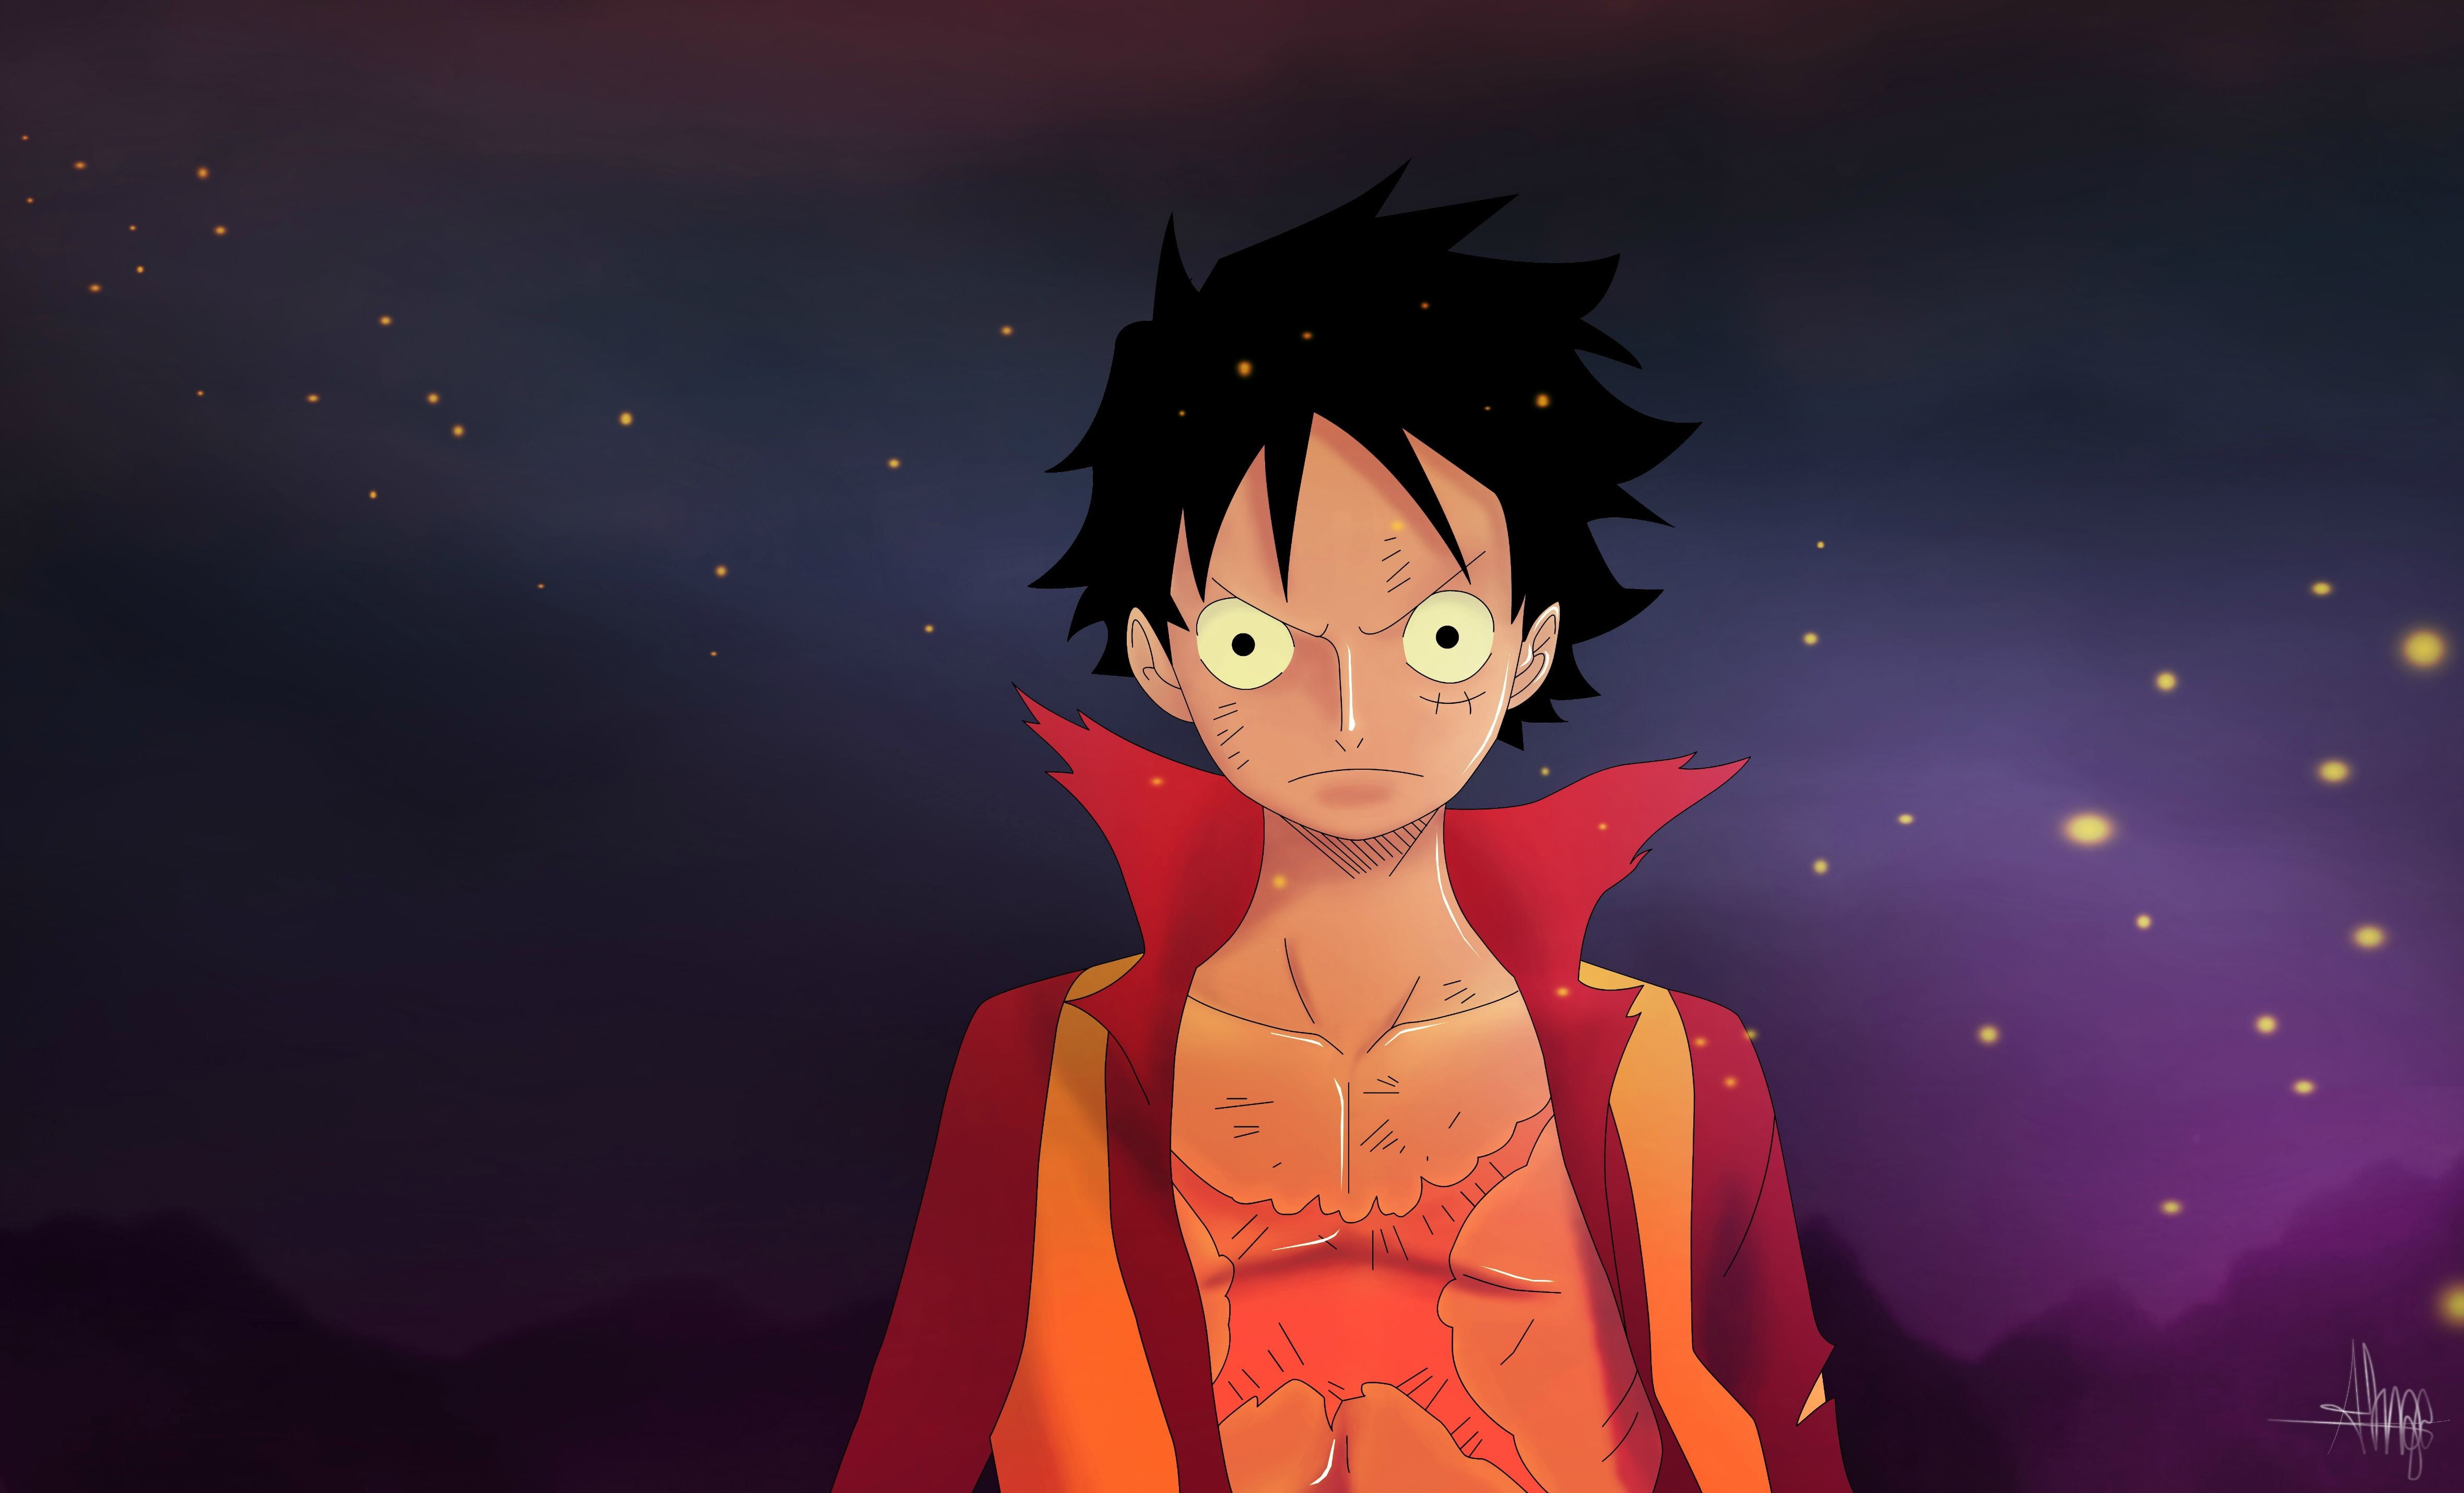 Luffy of One Piece clipart, One Piece, Monkey D. Luffy, anime boys, anime